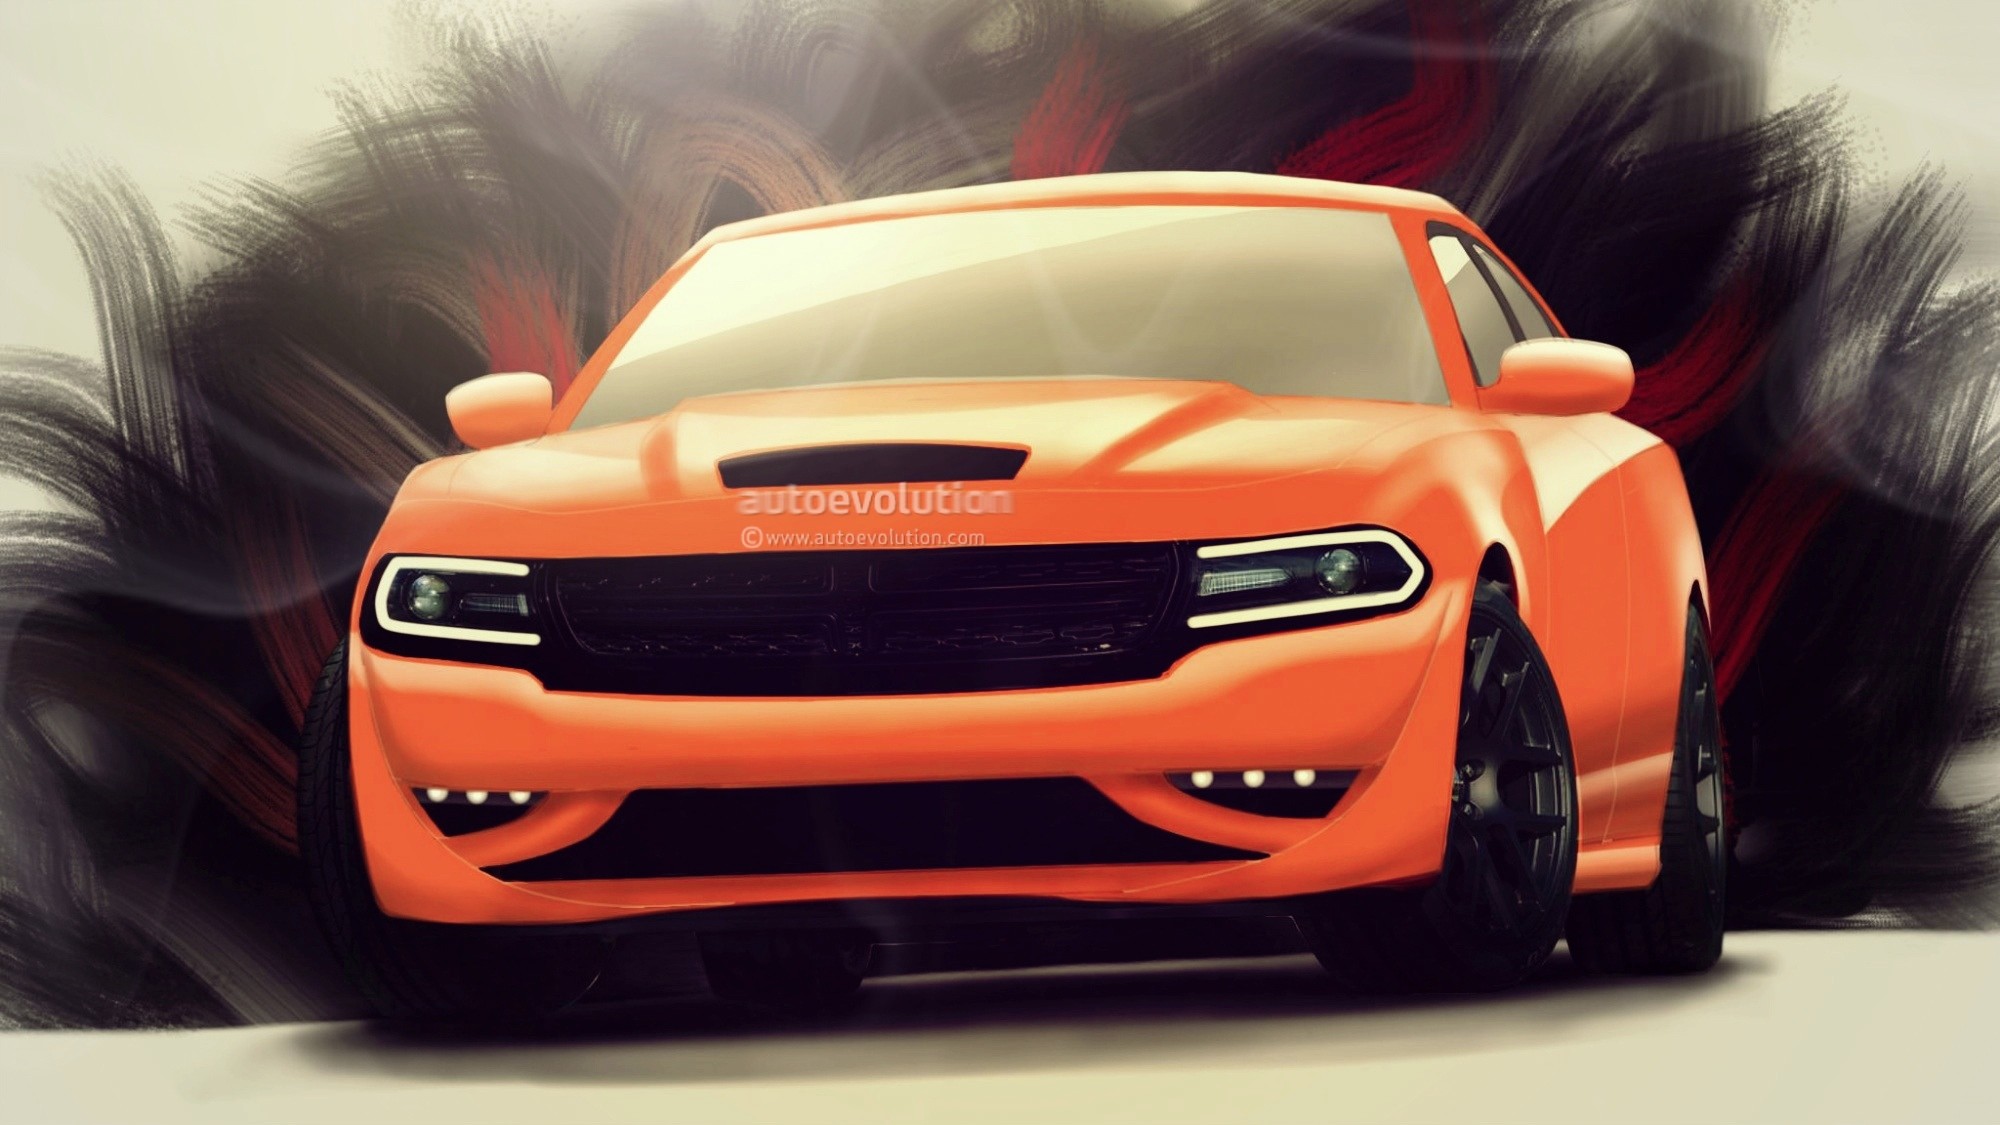 While The - Dodge Charger Srt Hellcat Hood - HD Wallpaper 